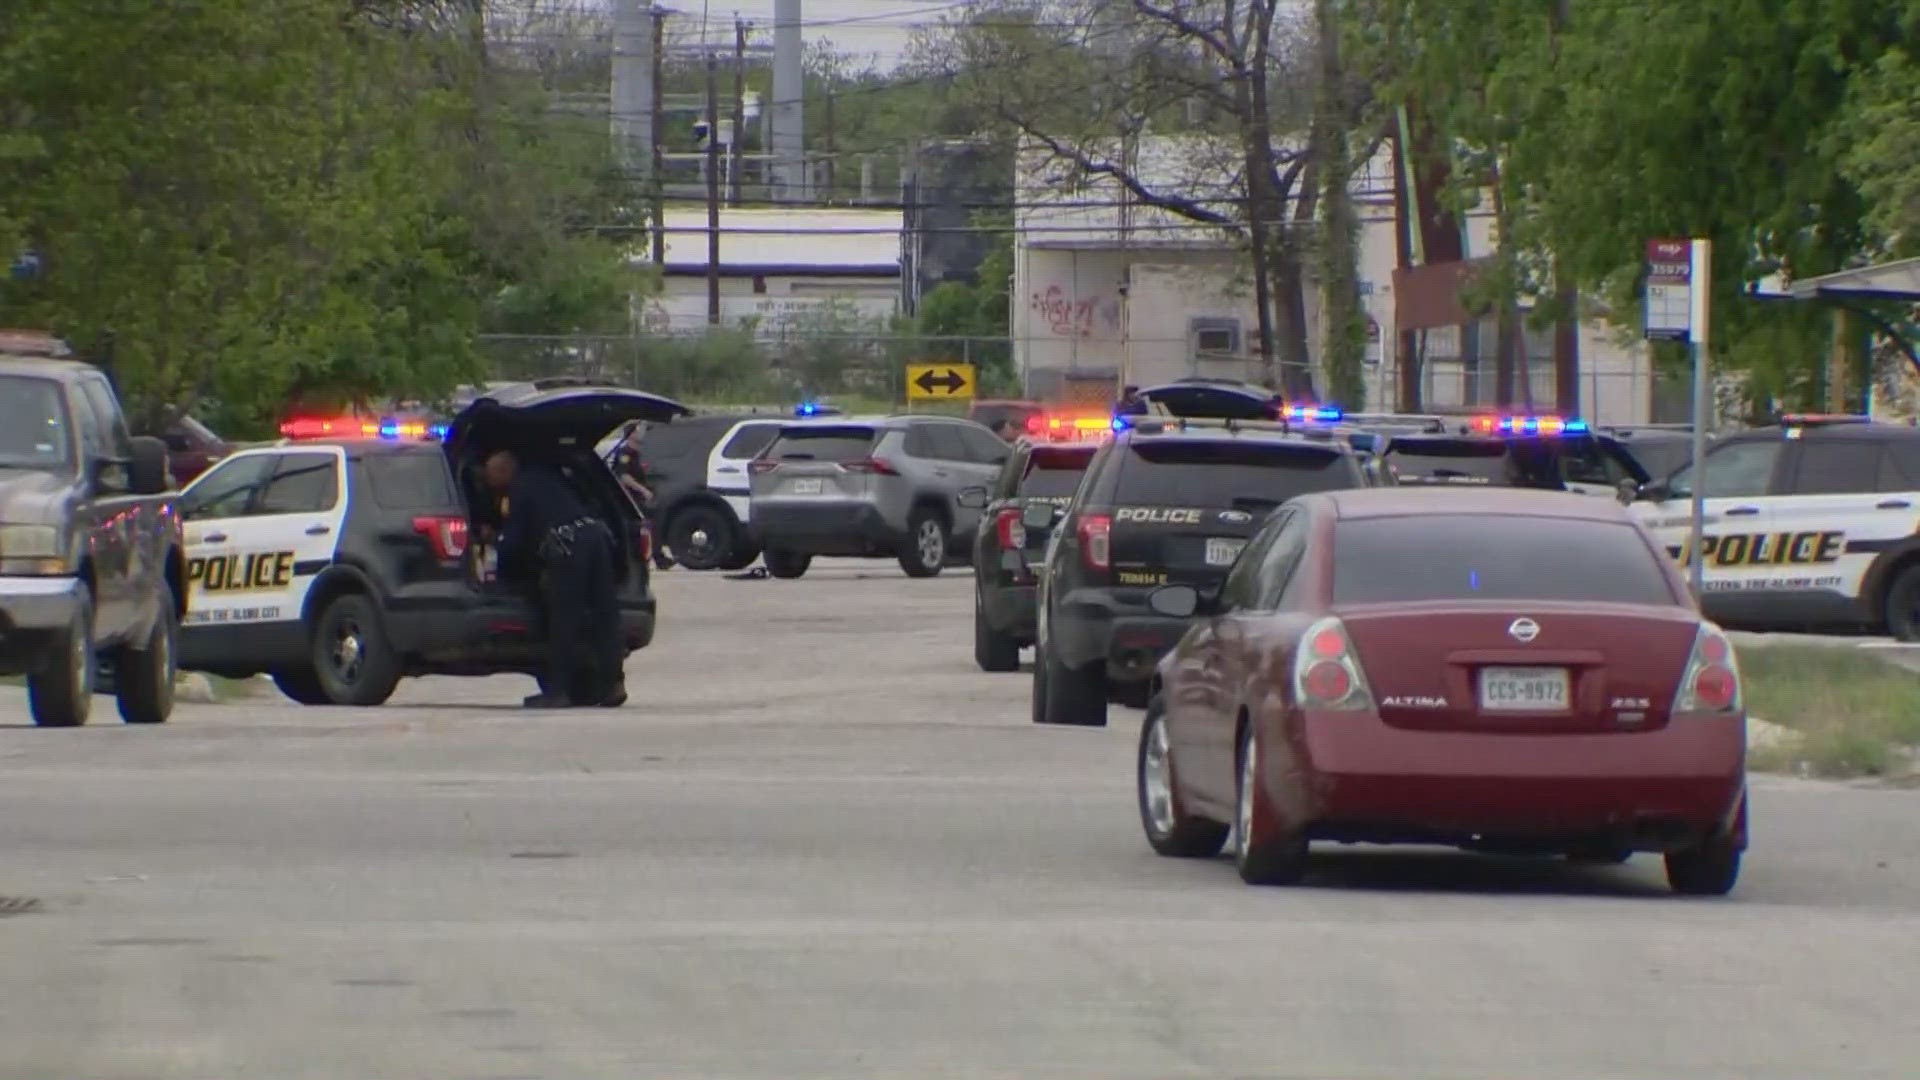 Officers responded to an east-side neighborhood after gunfire at a carwash.